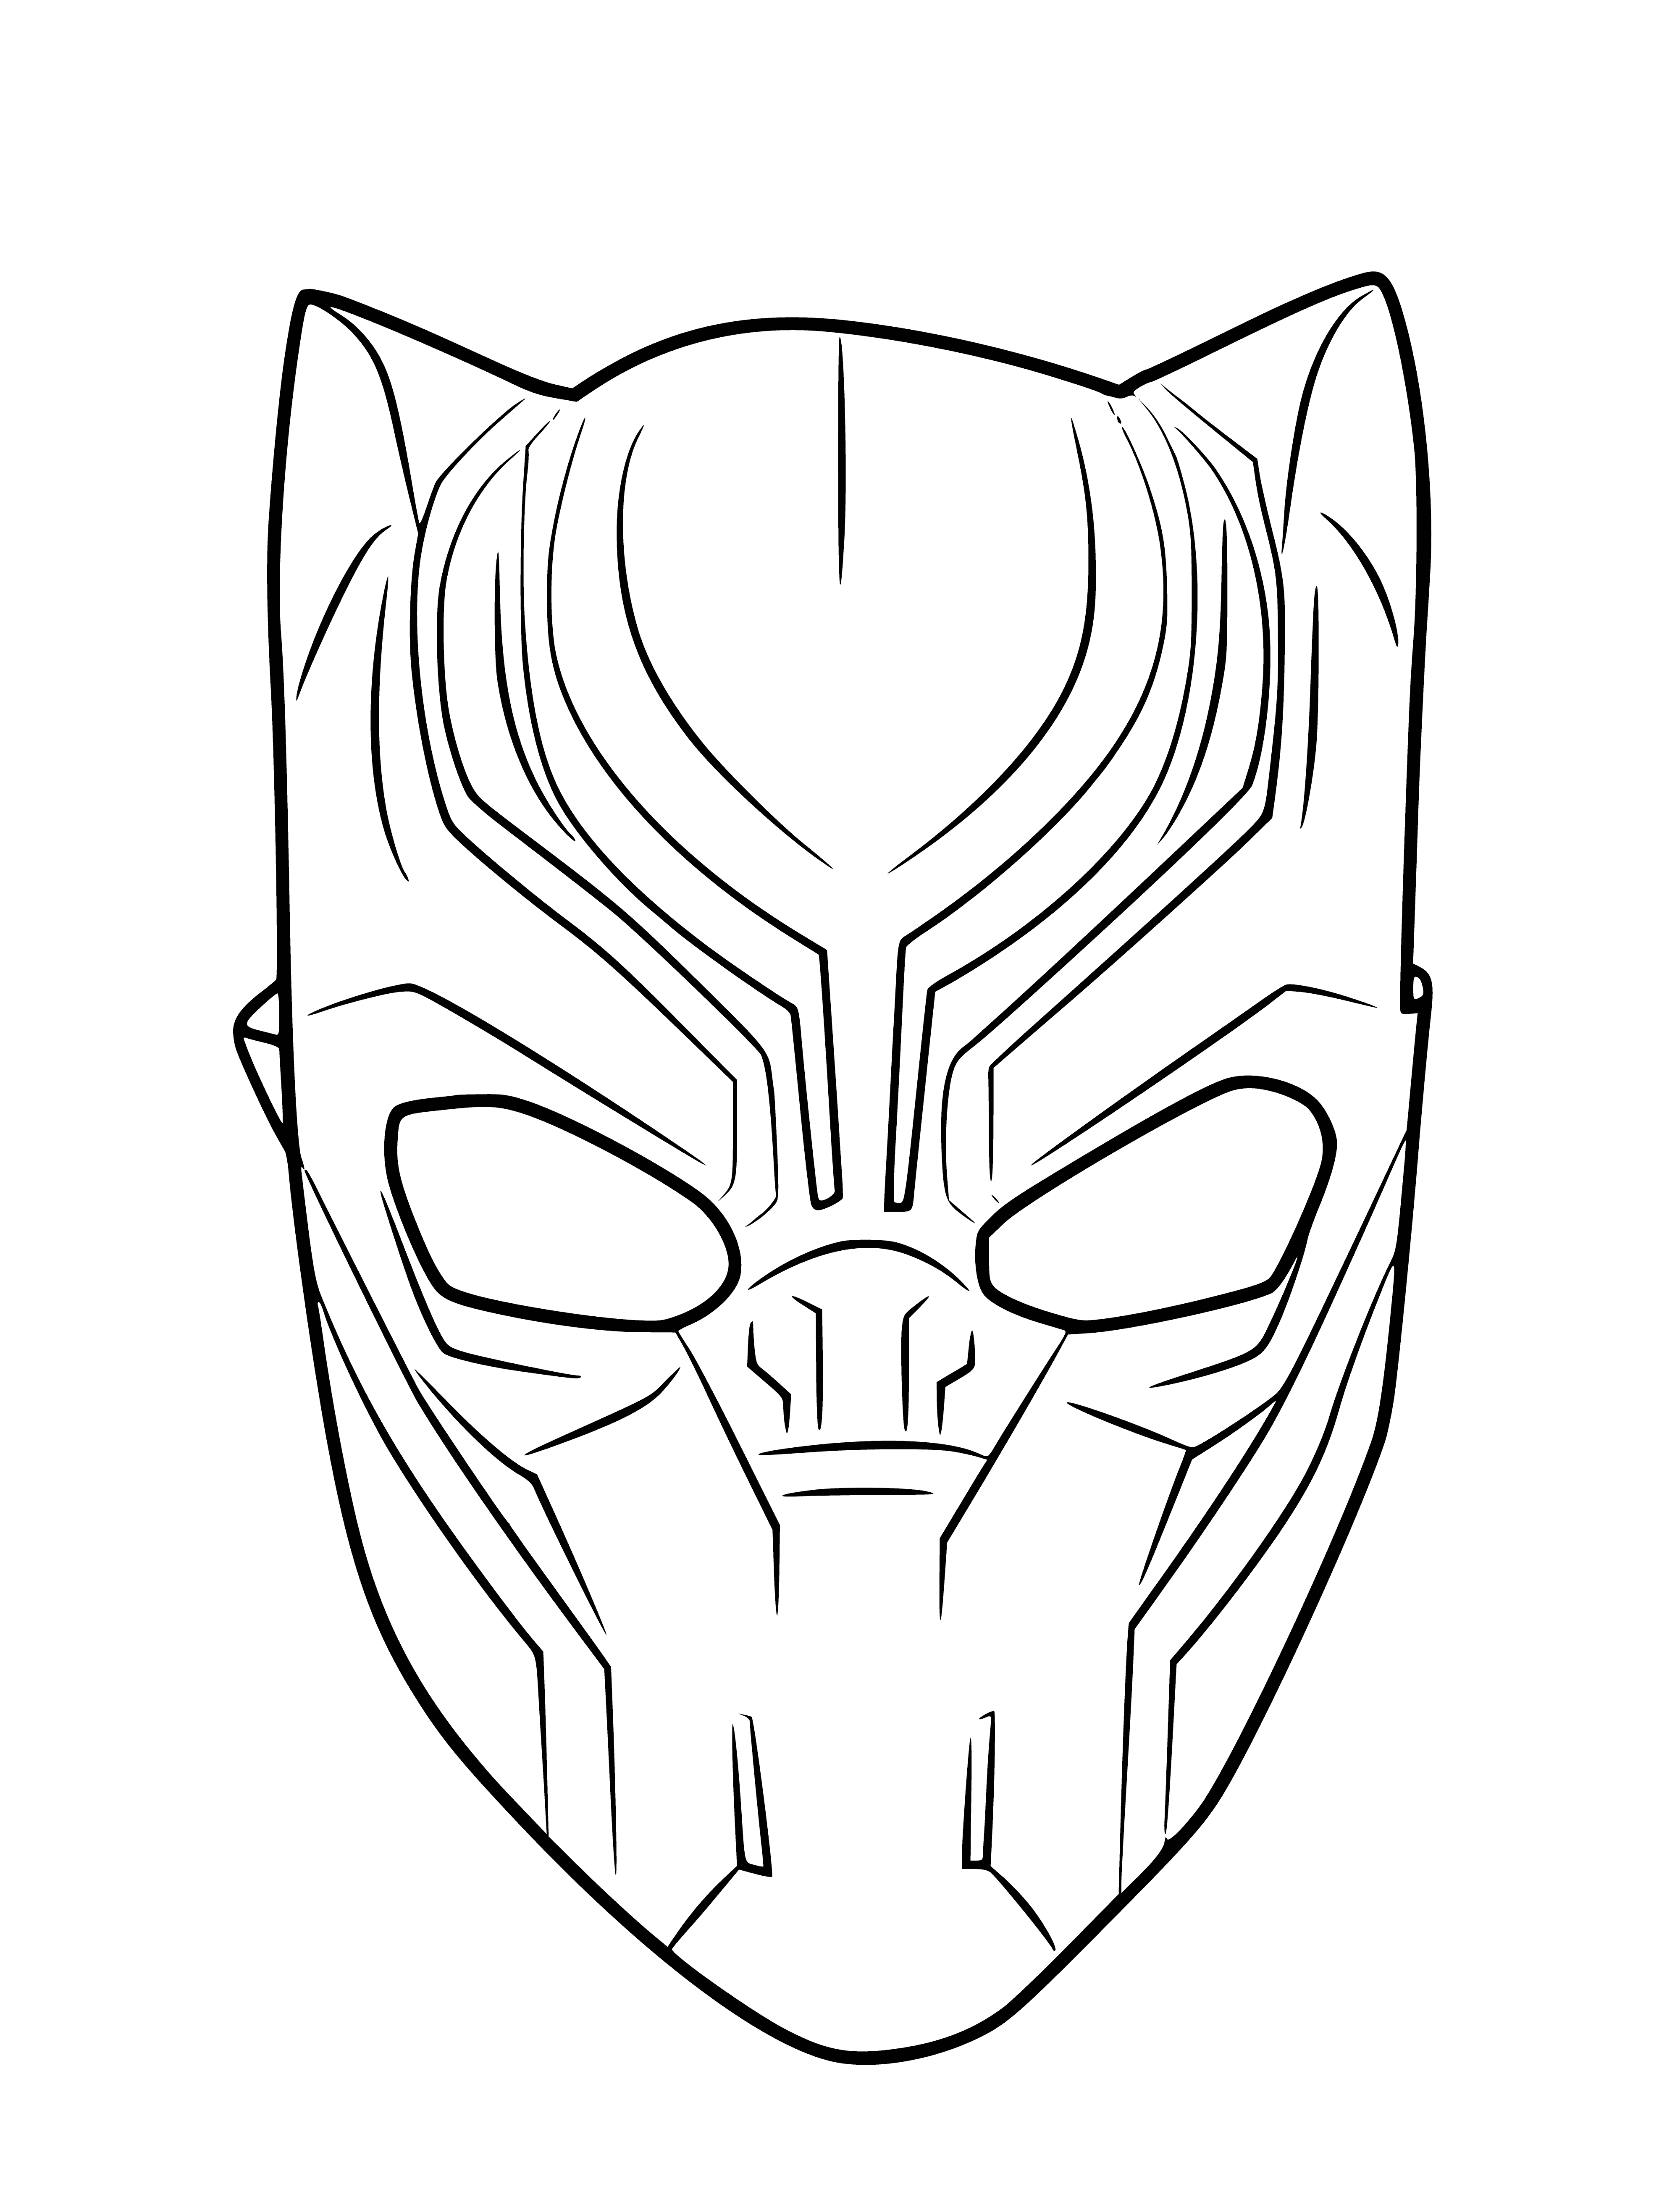 Black Panther Mask coloring page